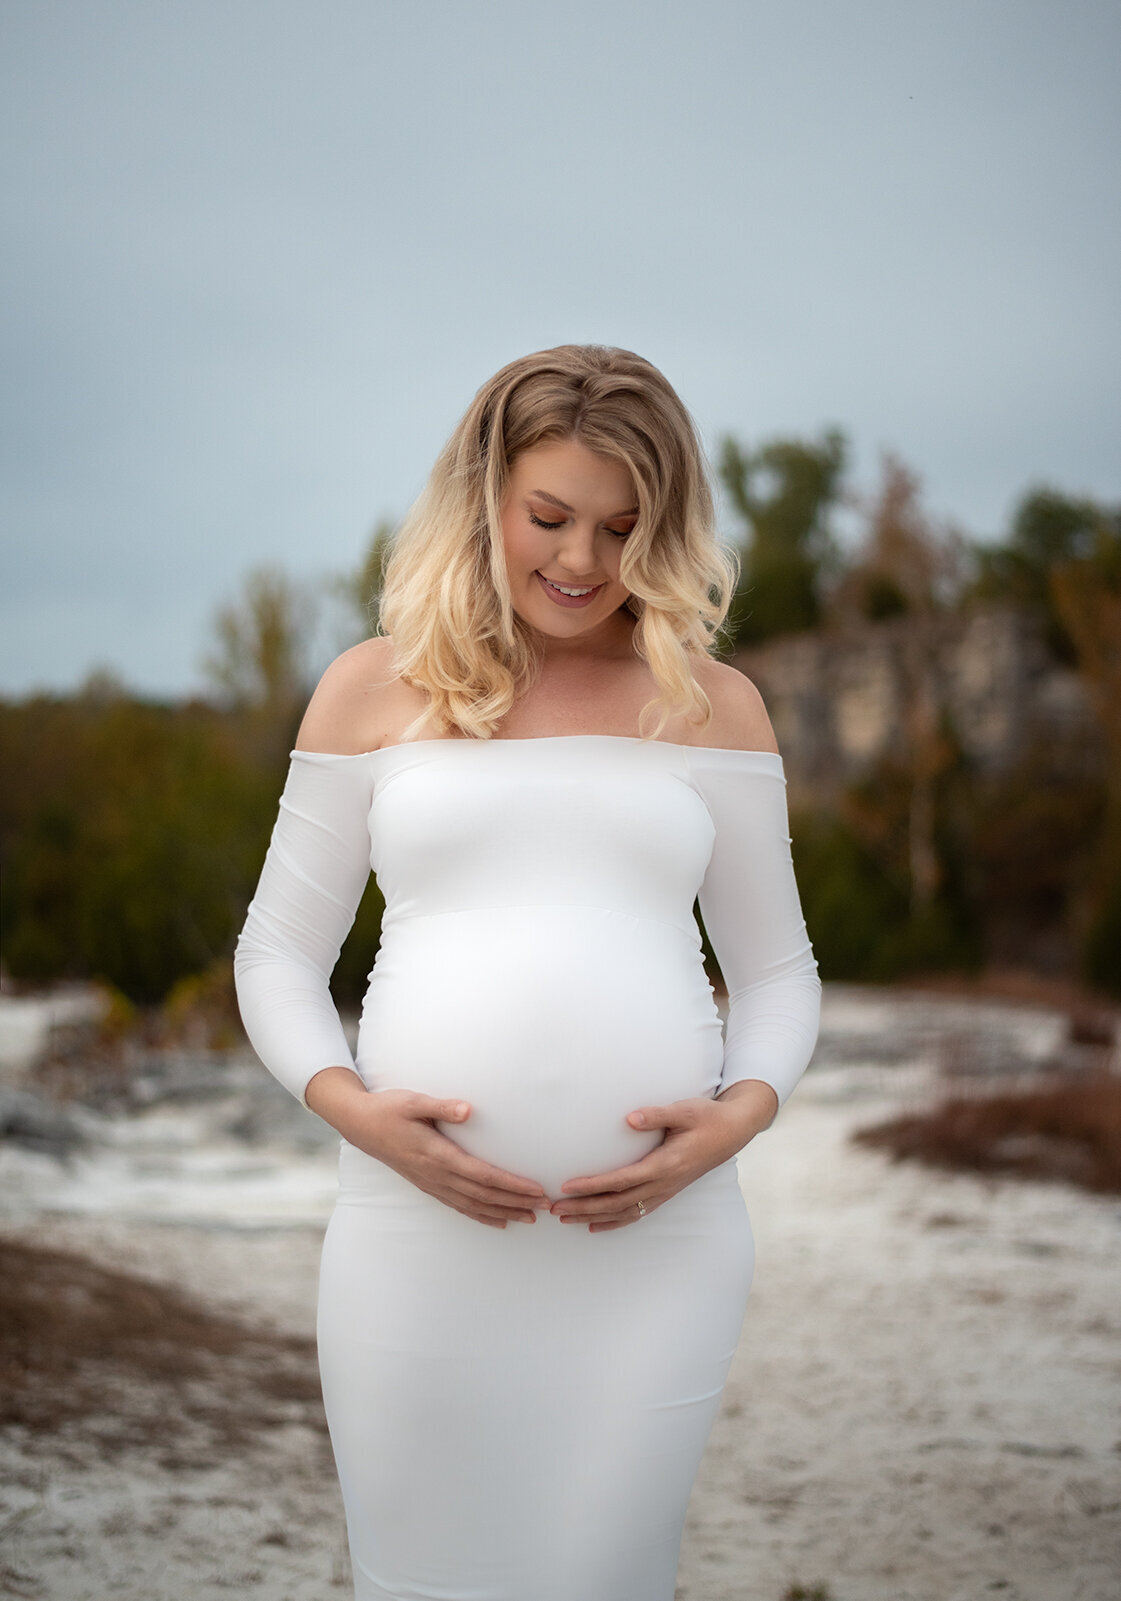 pregnant mom holding her belly outside wearing a white dress by st. louis maternity photographer, sutherland photography